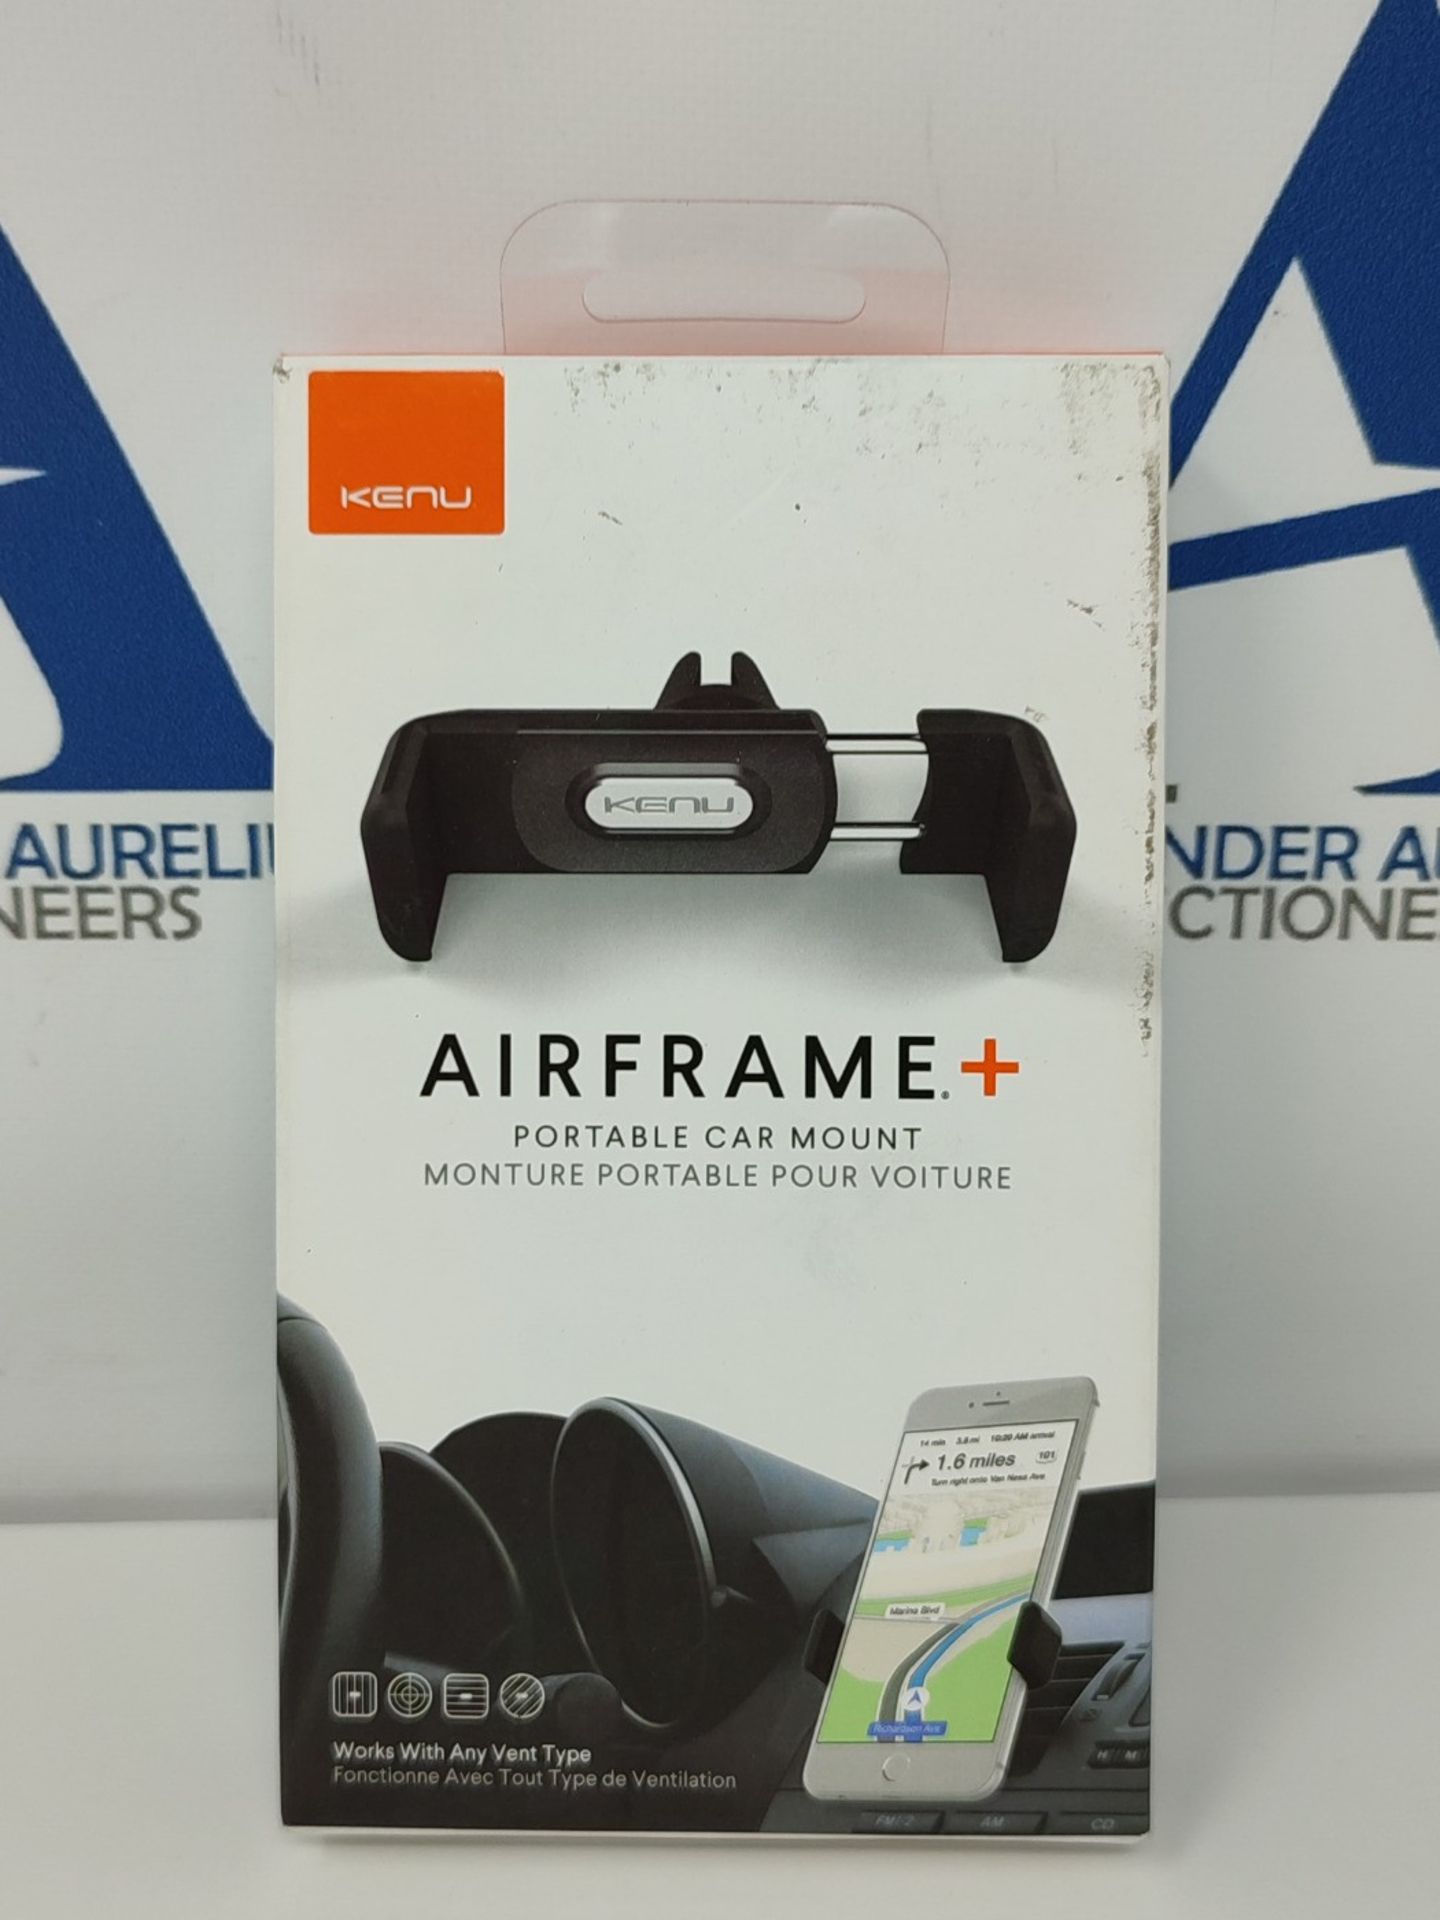 Kenu Airframe+, Air Vent Car Phone Holder Mount, Cell Phone Stand, Expandable Grip & 3 - Image 2 of 3